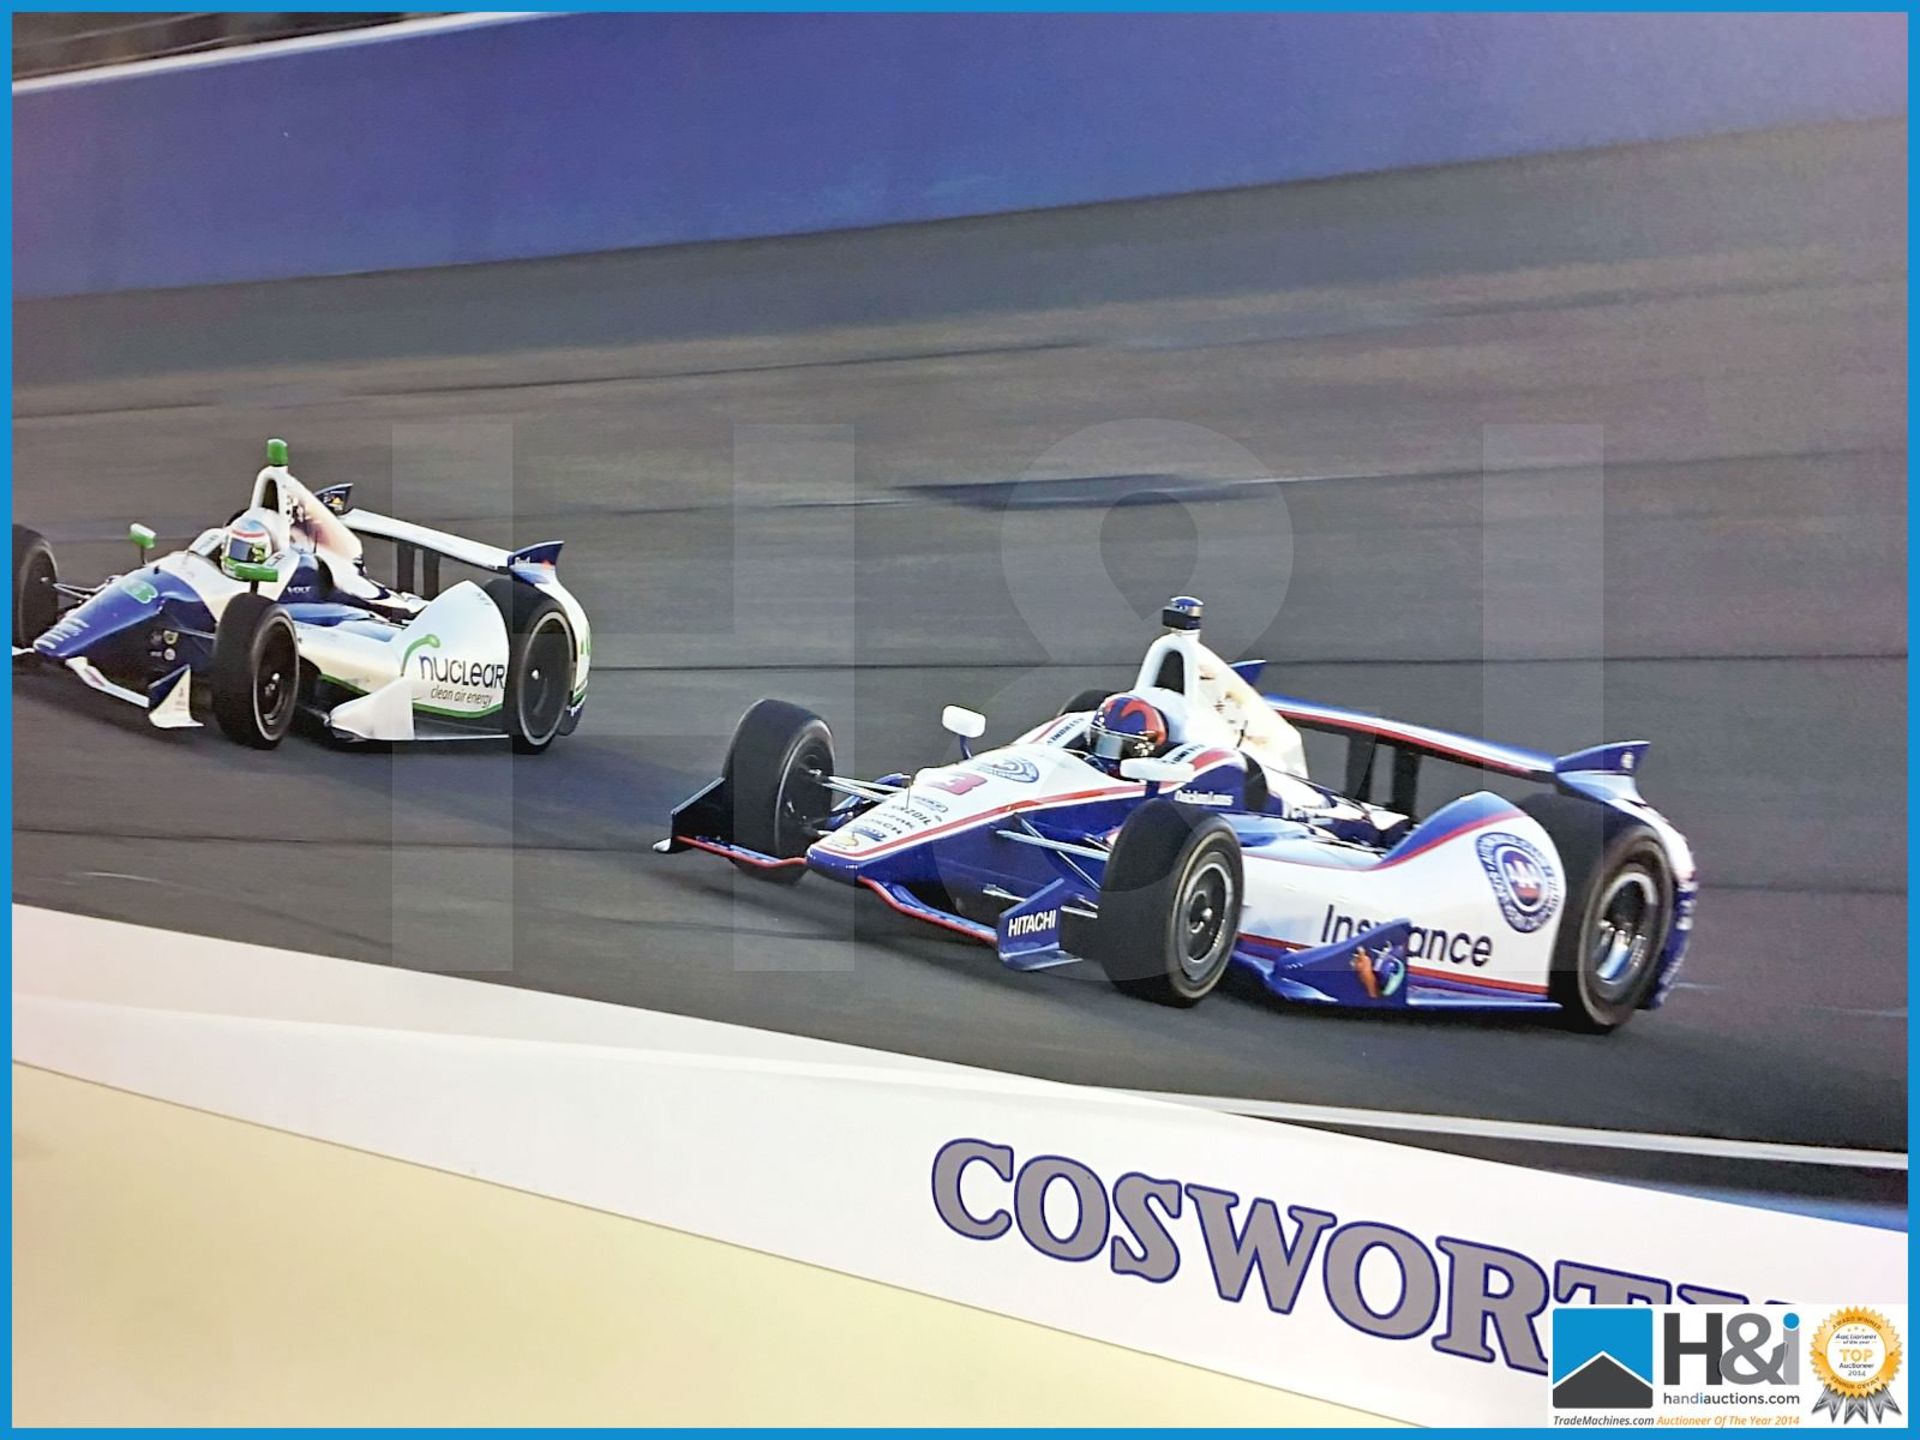 Large format print of Indy cars on race track. Ex Cosworth works. Approx 6ft X 3ft X 5mm. Never made - Image 3 of 4